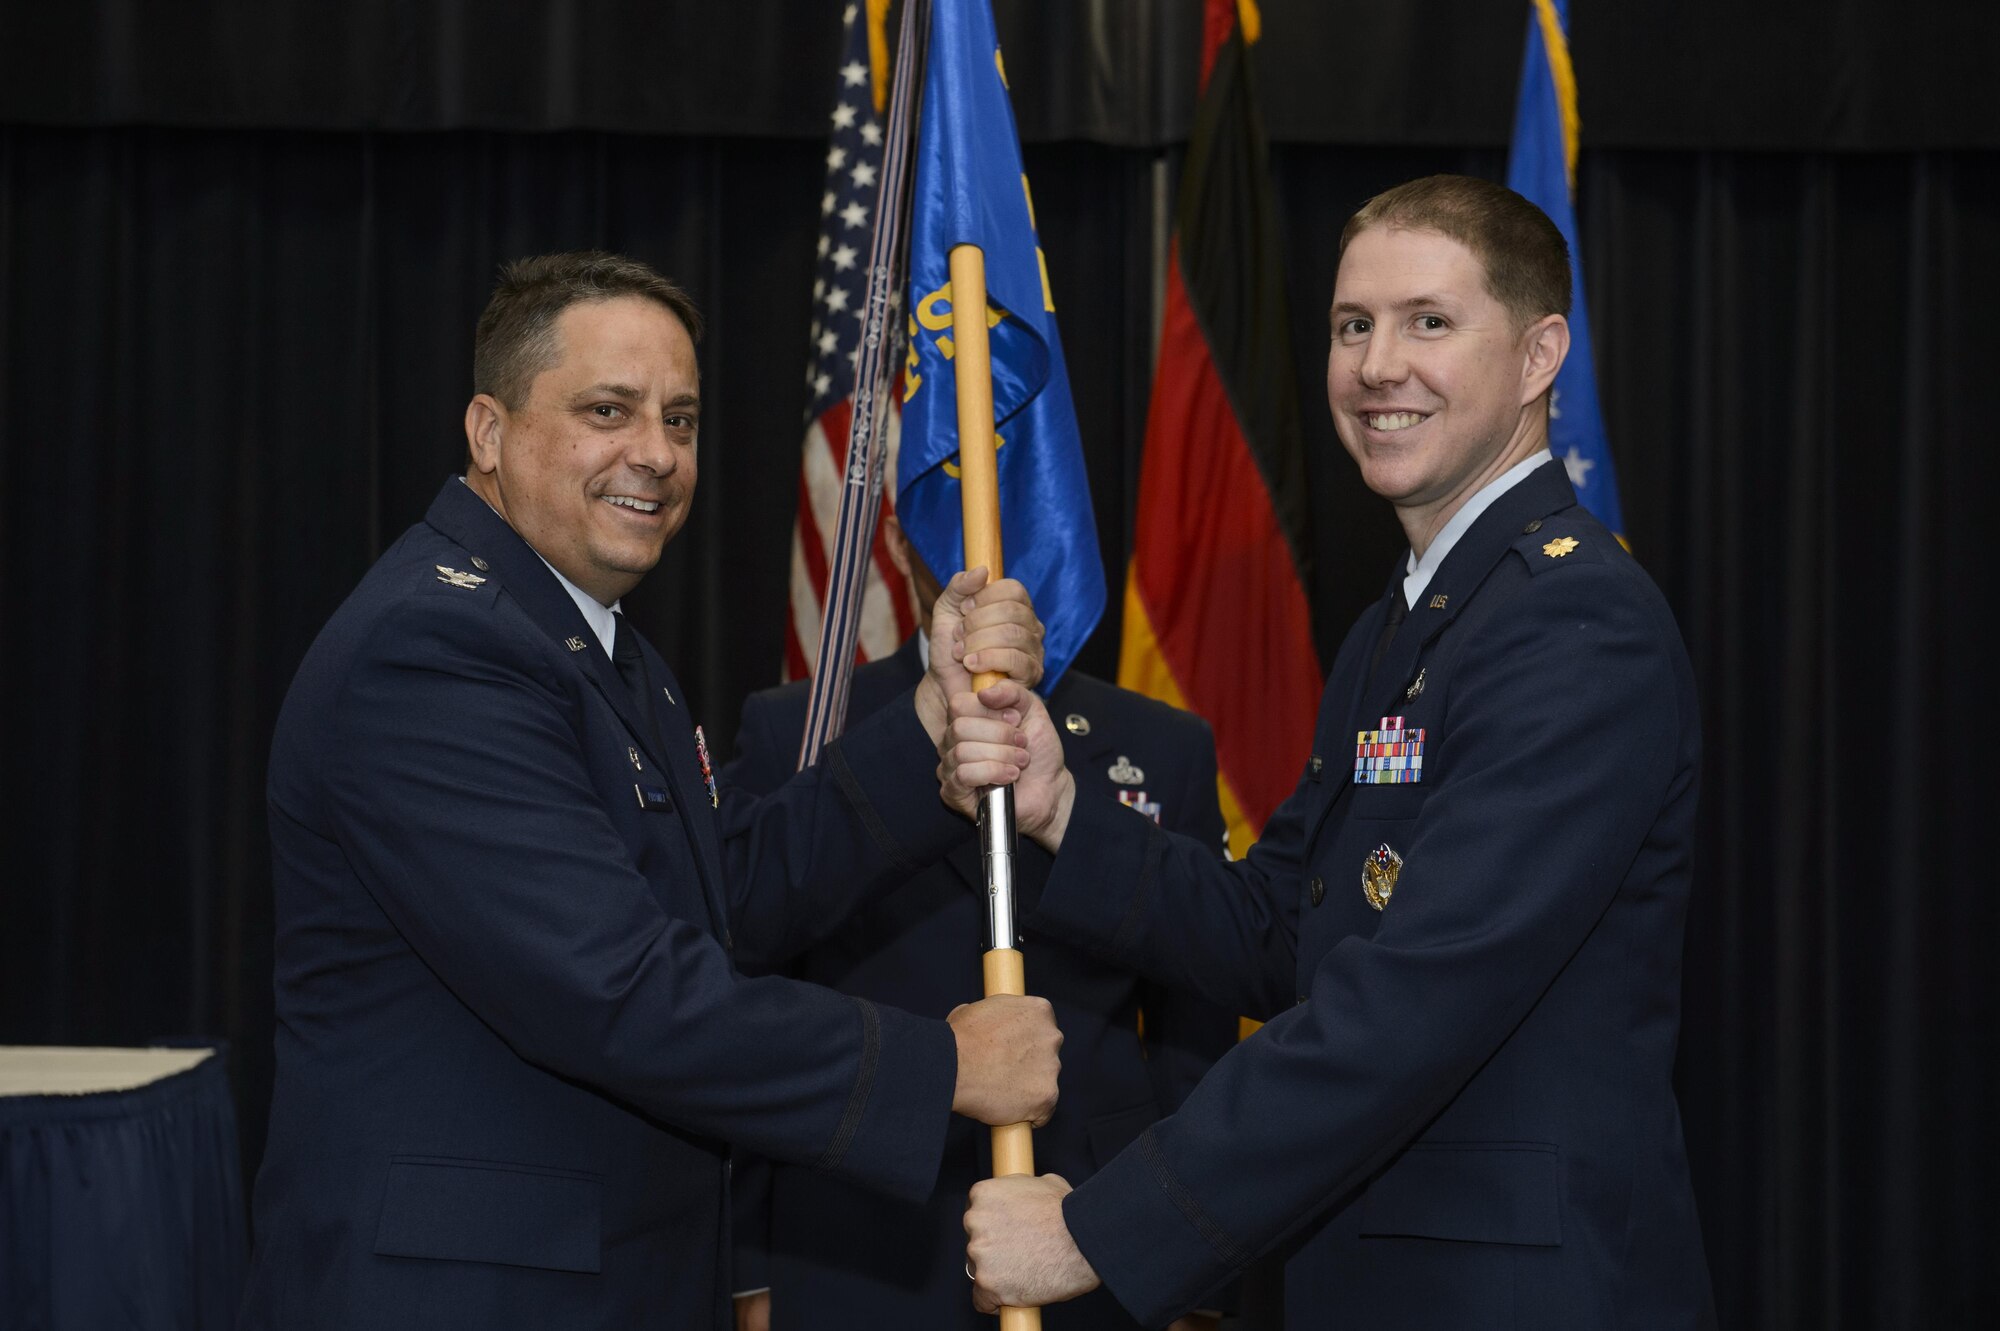 U.S. Air Force Col. Steven Zubowicz, left, 52nd Mission Support Group commander, gives the ceremonial guidon to U.S. Air Force Maj. Robert Clark, right, incoming 52nd Force Support Squadron commander, during the 52nd FSS change of command ceremony at Spangdahlem Air Base, Germany, July 21, 2017. (U.S. Air Force photo by Staff Sgt. Jonathan Snyder)